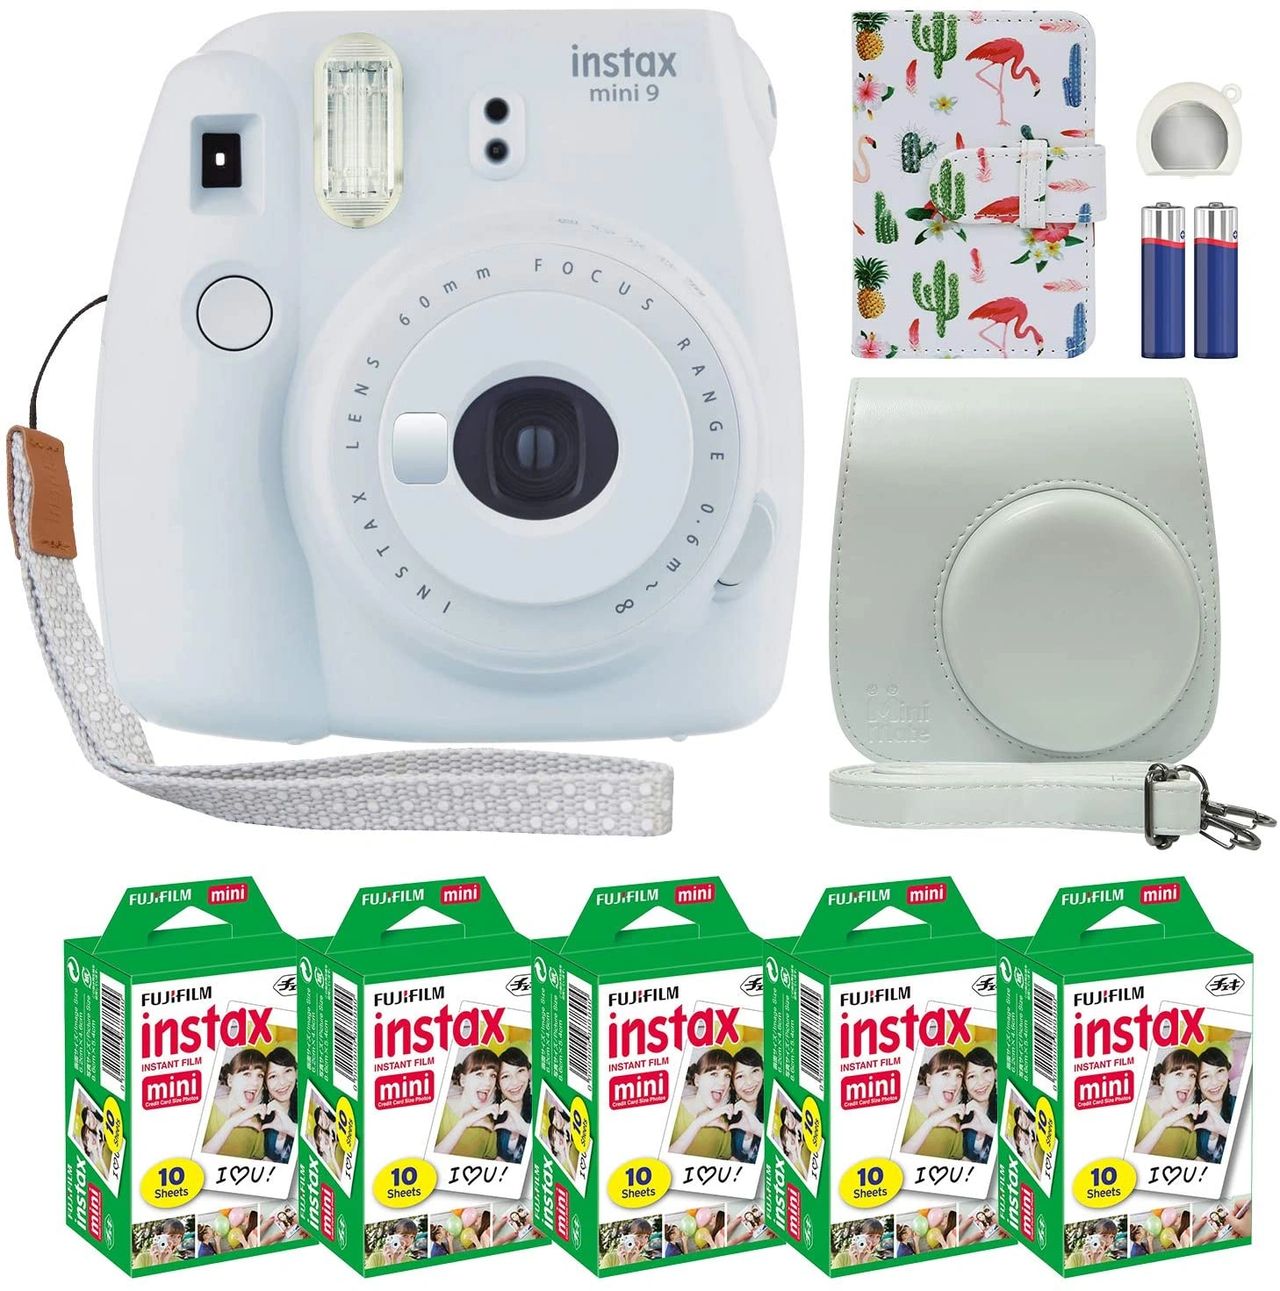 Light, compact and instant, Polaroid Cameras are great gateways into fine-art photography.